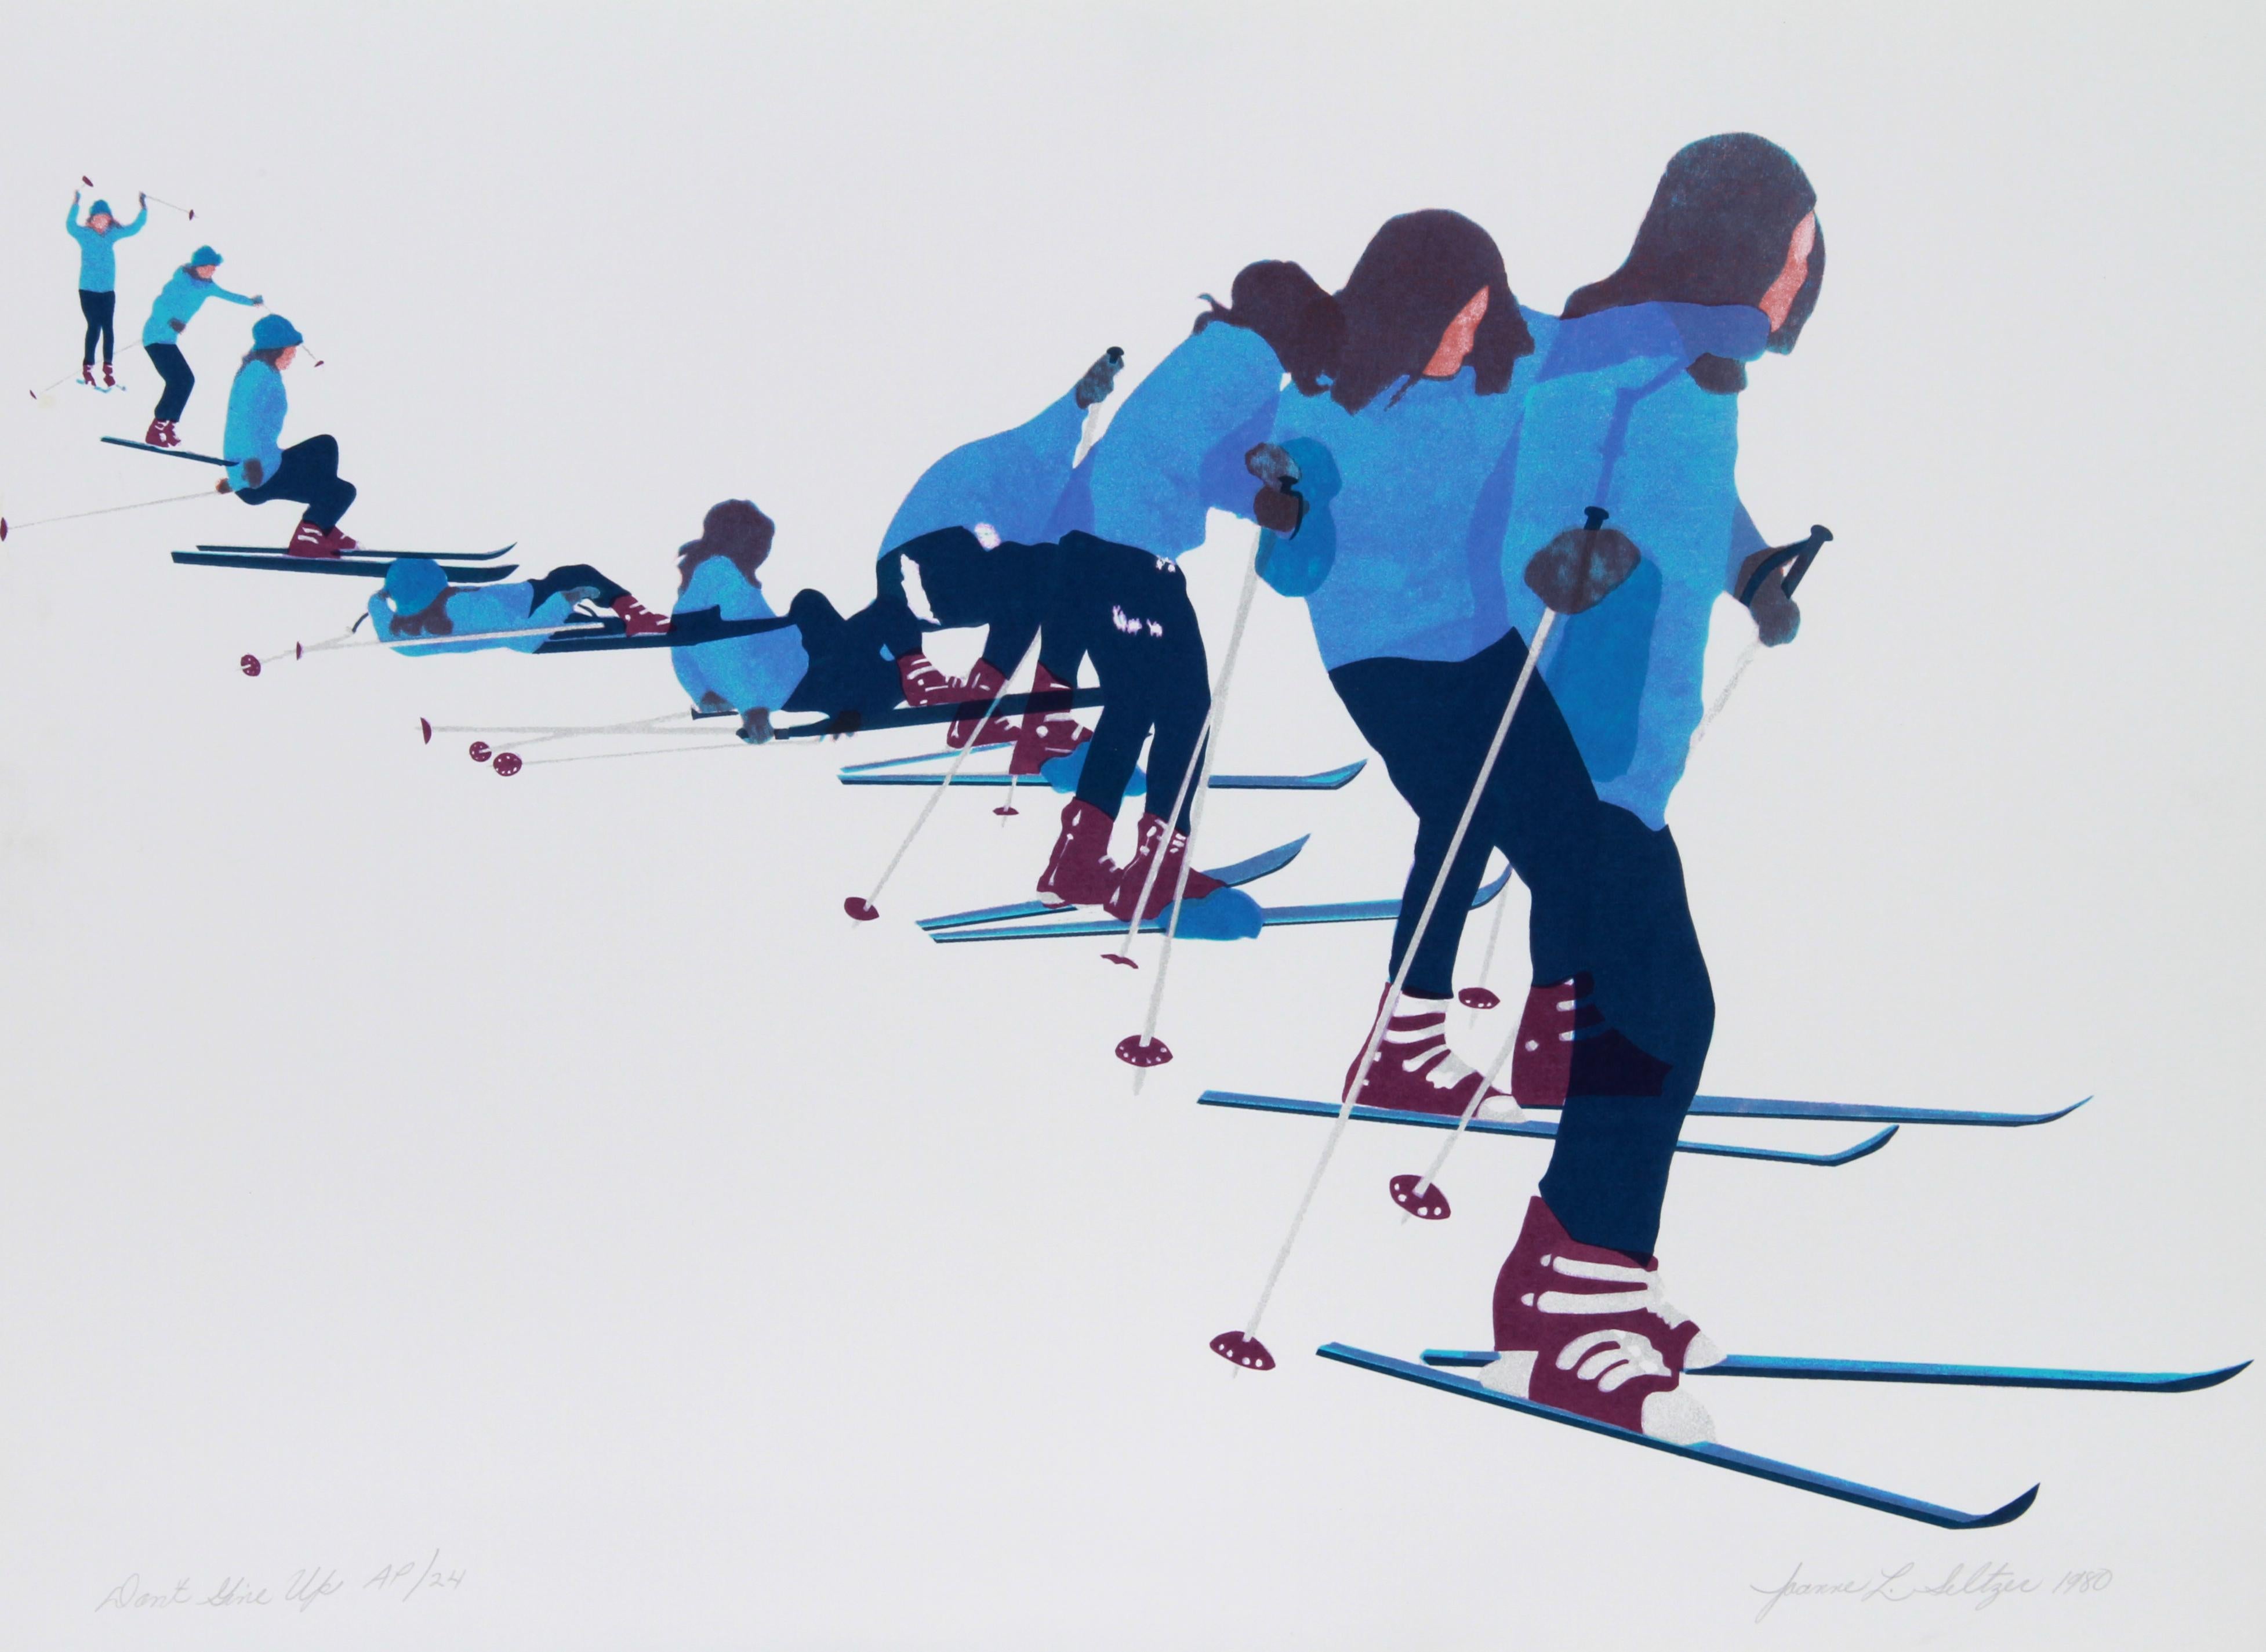 Artist: Joanne Seltzer
Title: Don't Give Up
Year: 1980
Medium: Lithograph, signed and numbered in pencil
Edition: 200 + AP's
Paper Size: 22 x 30 inches